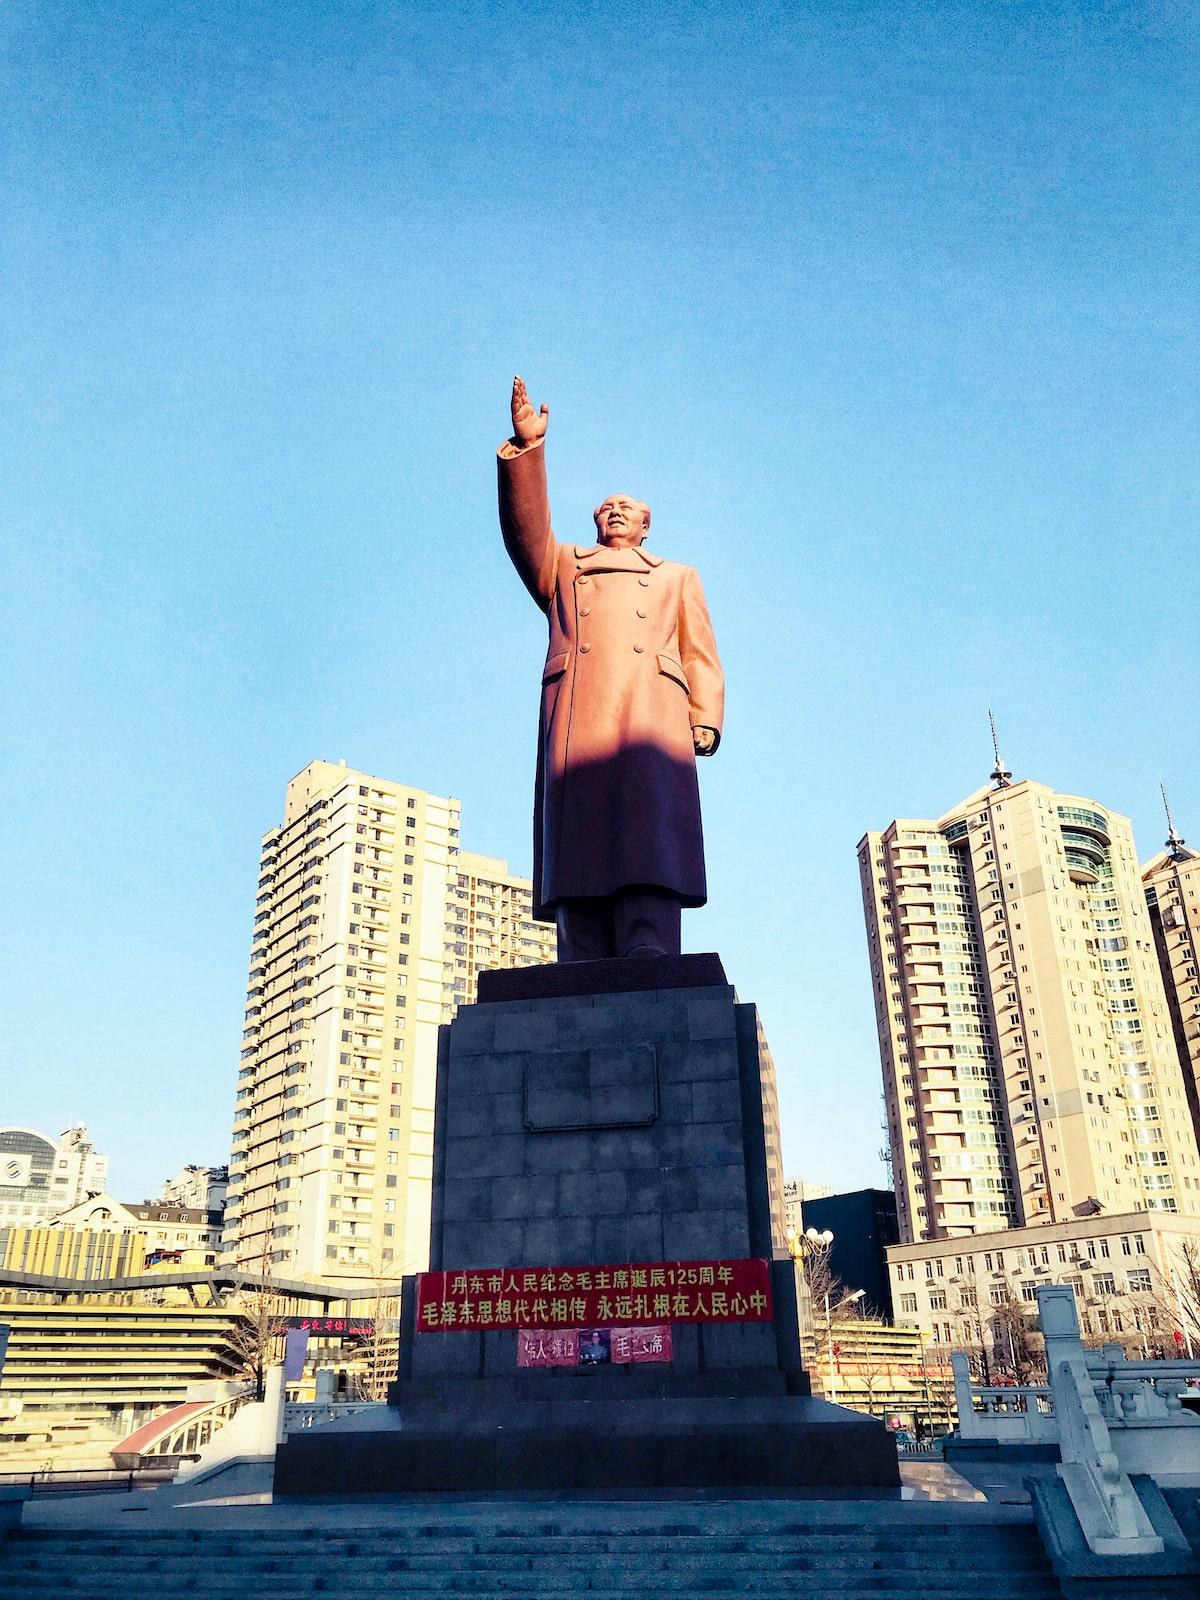 A giant bronze statue of Chairman Mao with his arm raised high in Dandong, China